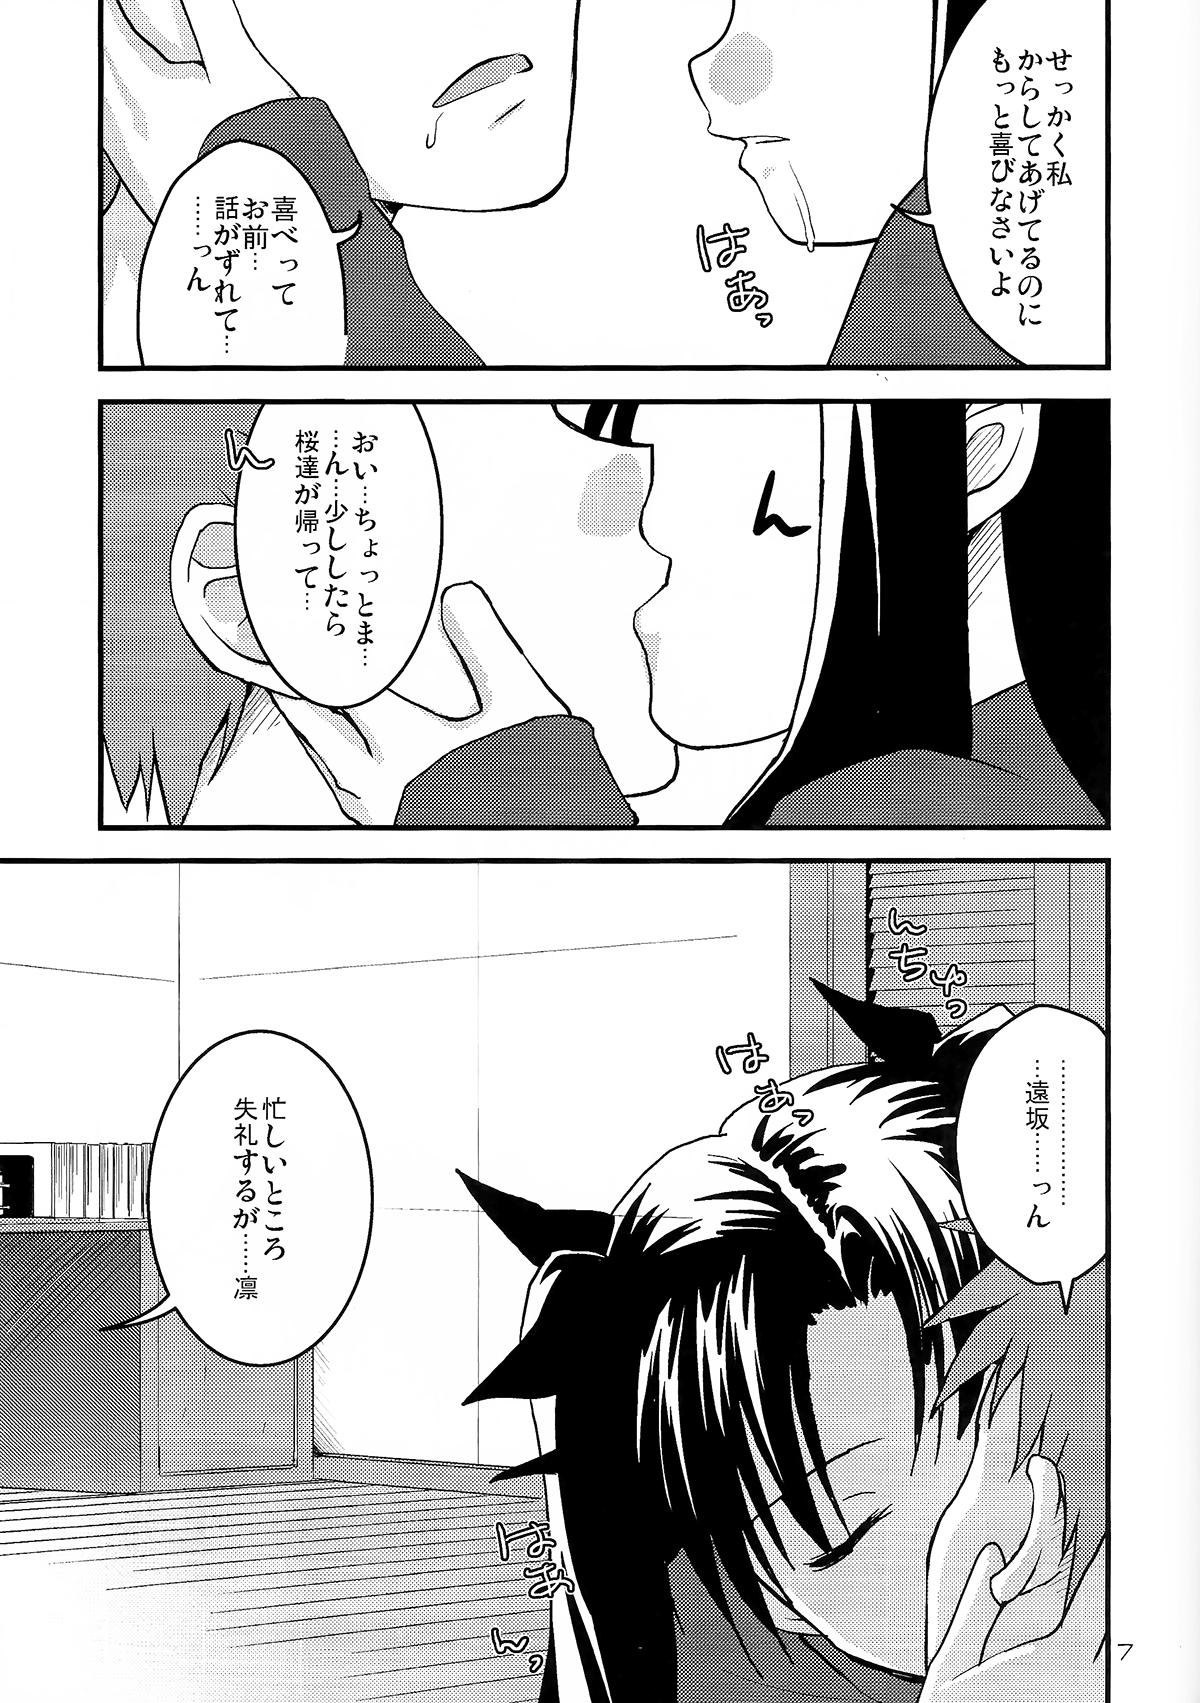 Buceta Fakers - Fate stay night Gay Blackhair - Page 6